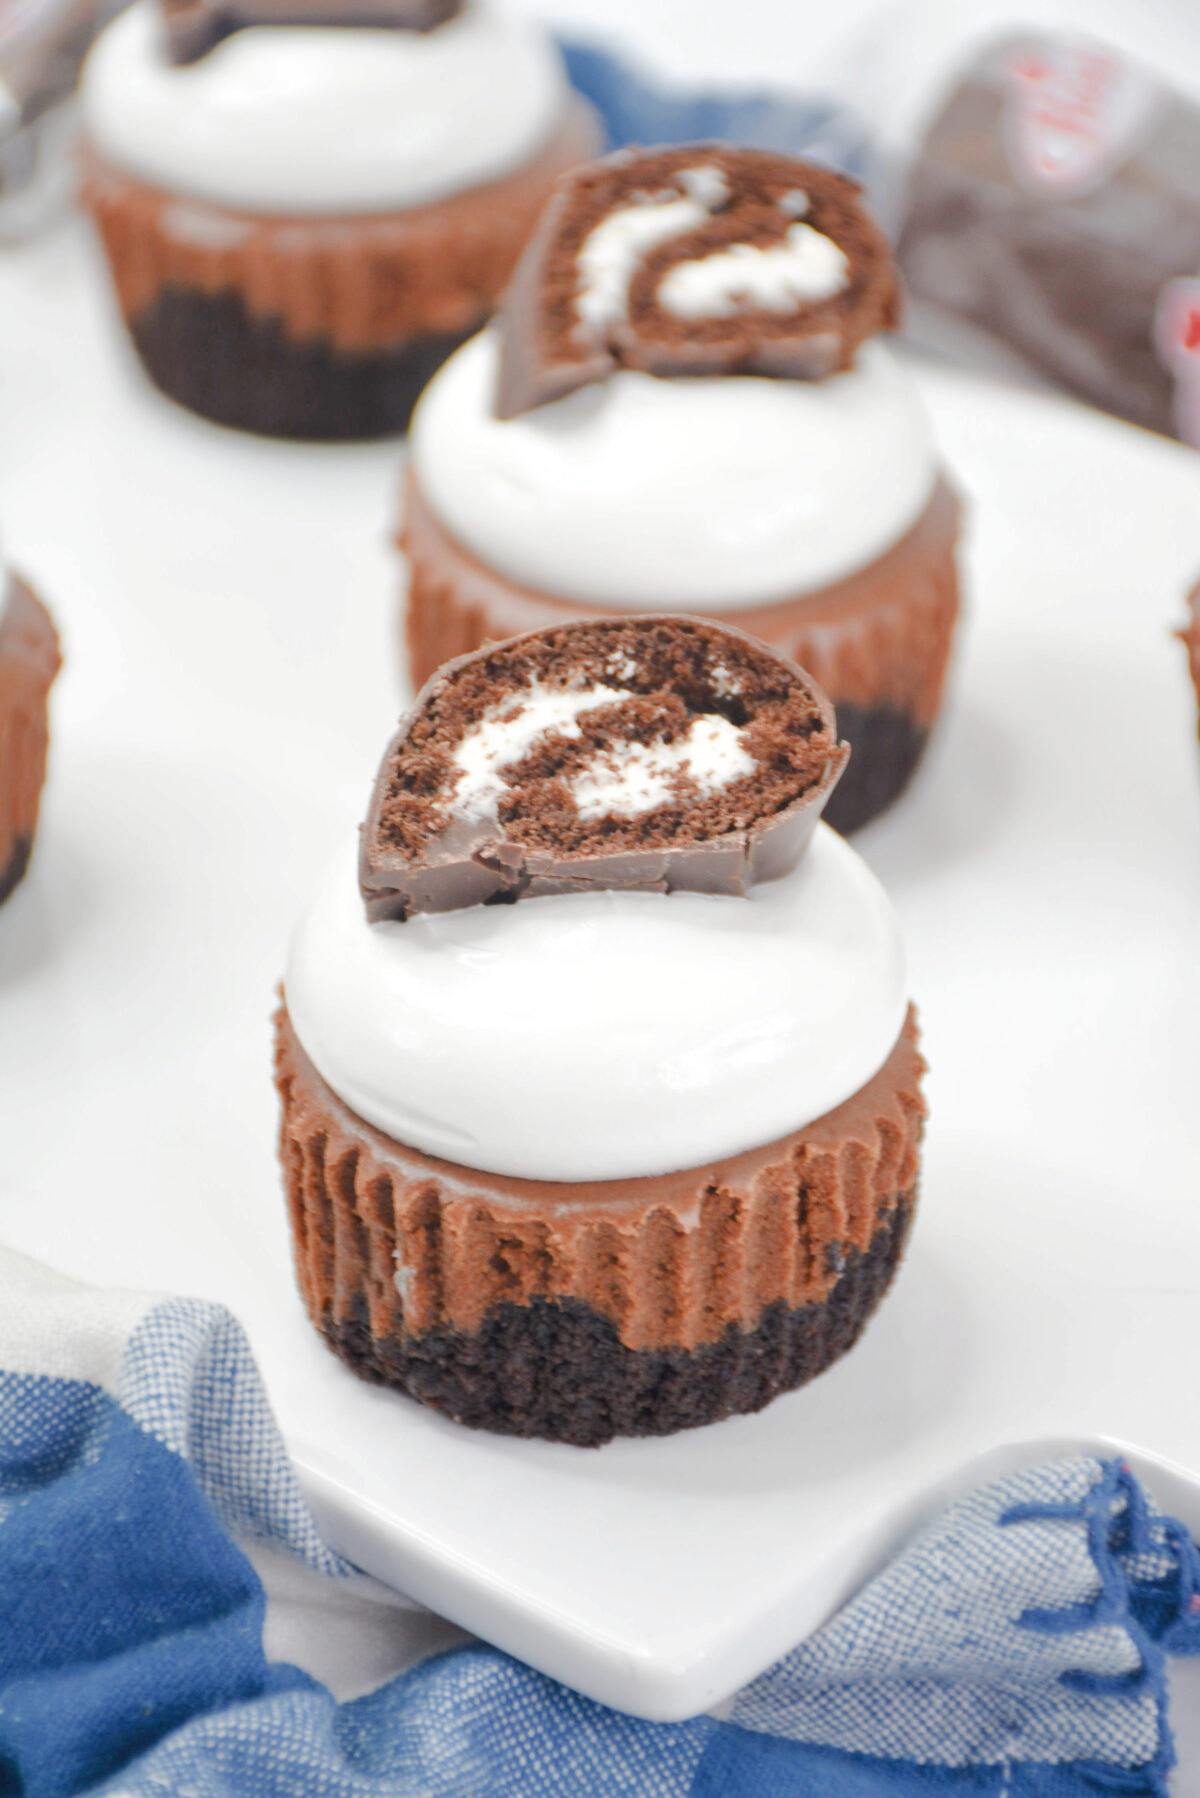 These mini HoHo cheesecakes are the perfect dessert for any occasion! Quick, easy, and delicious - better than chocolate swiss rolls!